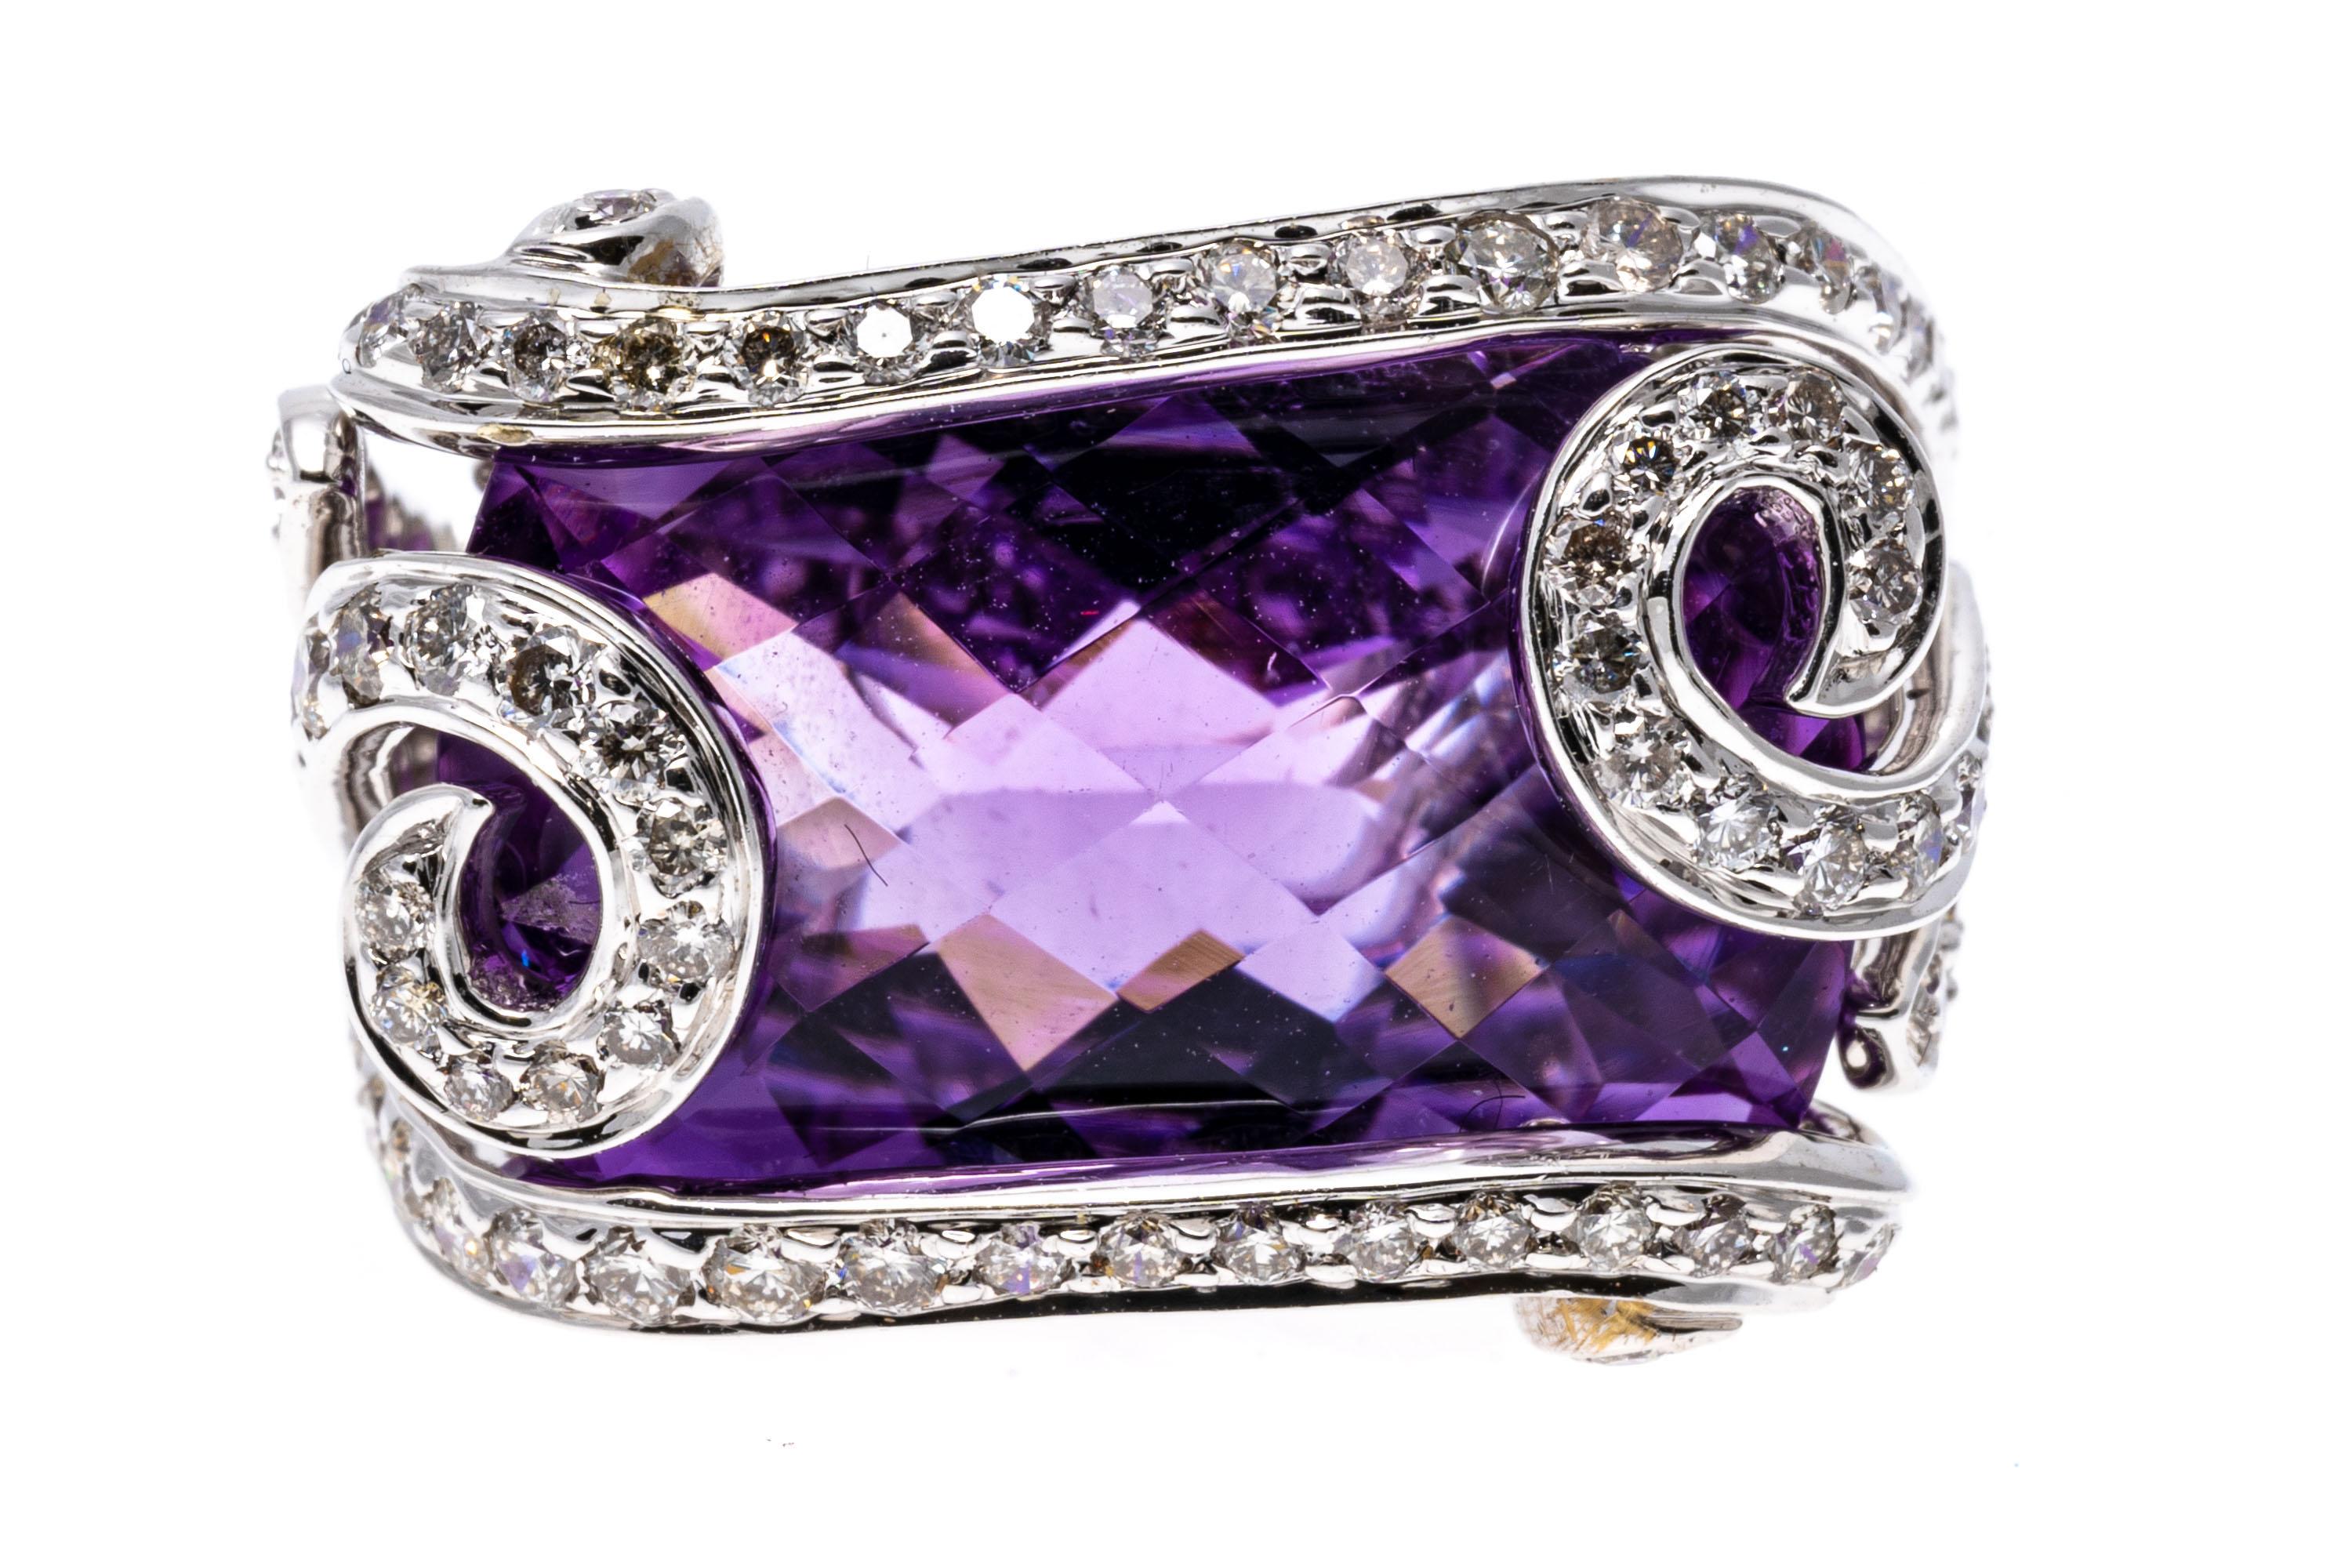 18k white gold ring. This unusual ring features a horizontal, rectangular checkerboard cushion, light purple color amethyst, set in a caged, swirled border and shank, set with round faceted diamonds, approximately 0.42 TCW.
Marks: 750
Dimensions: